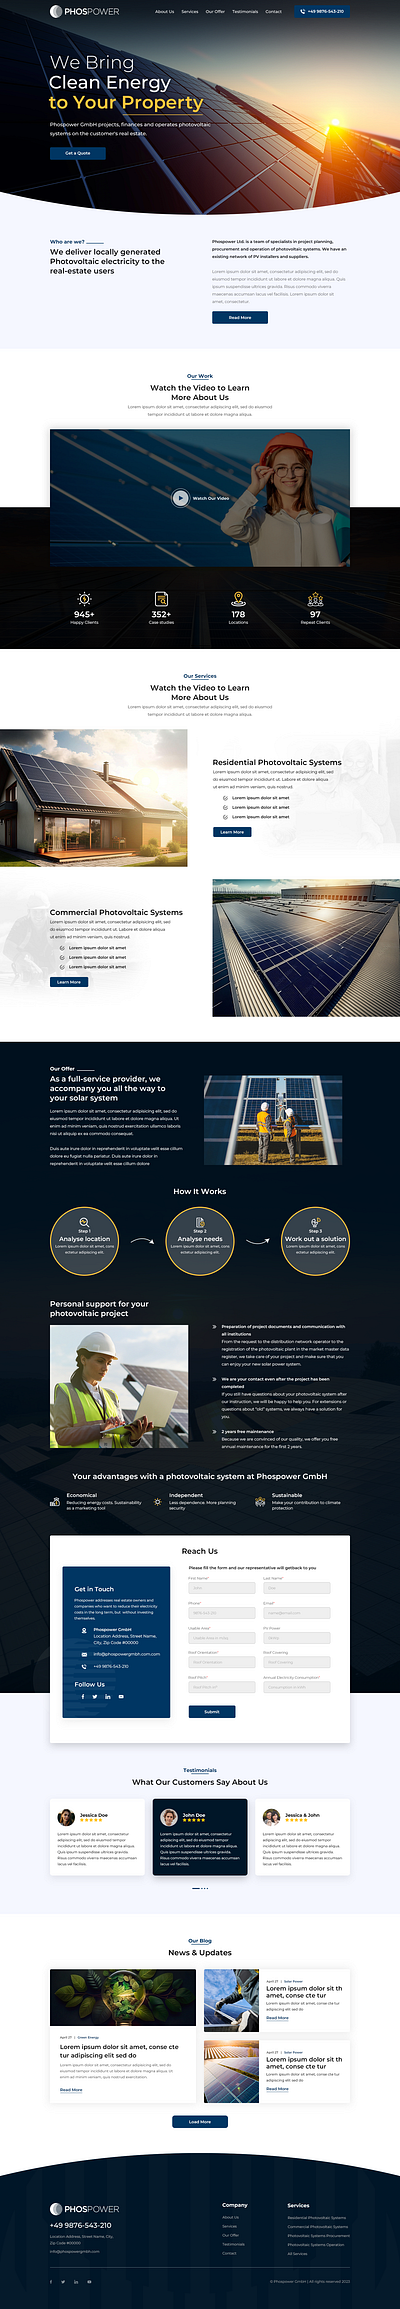 Webpage for a Solar Power company landing page design ui uiux ux web web design web design website website design